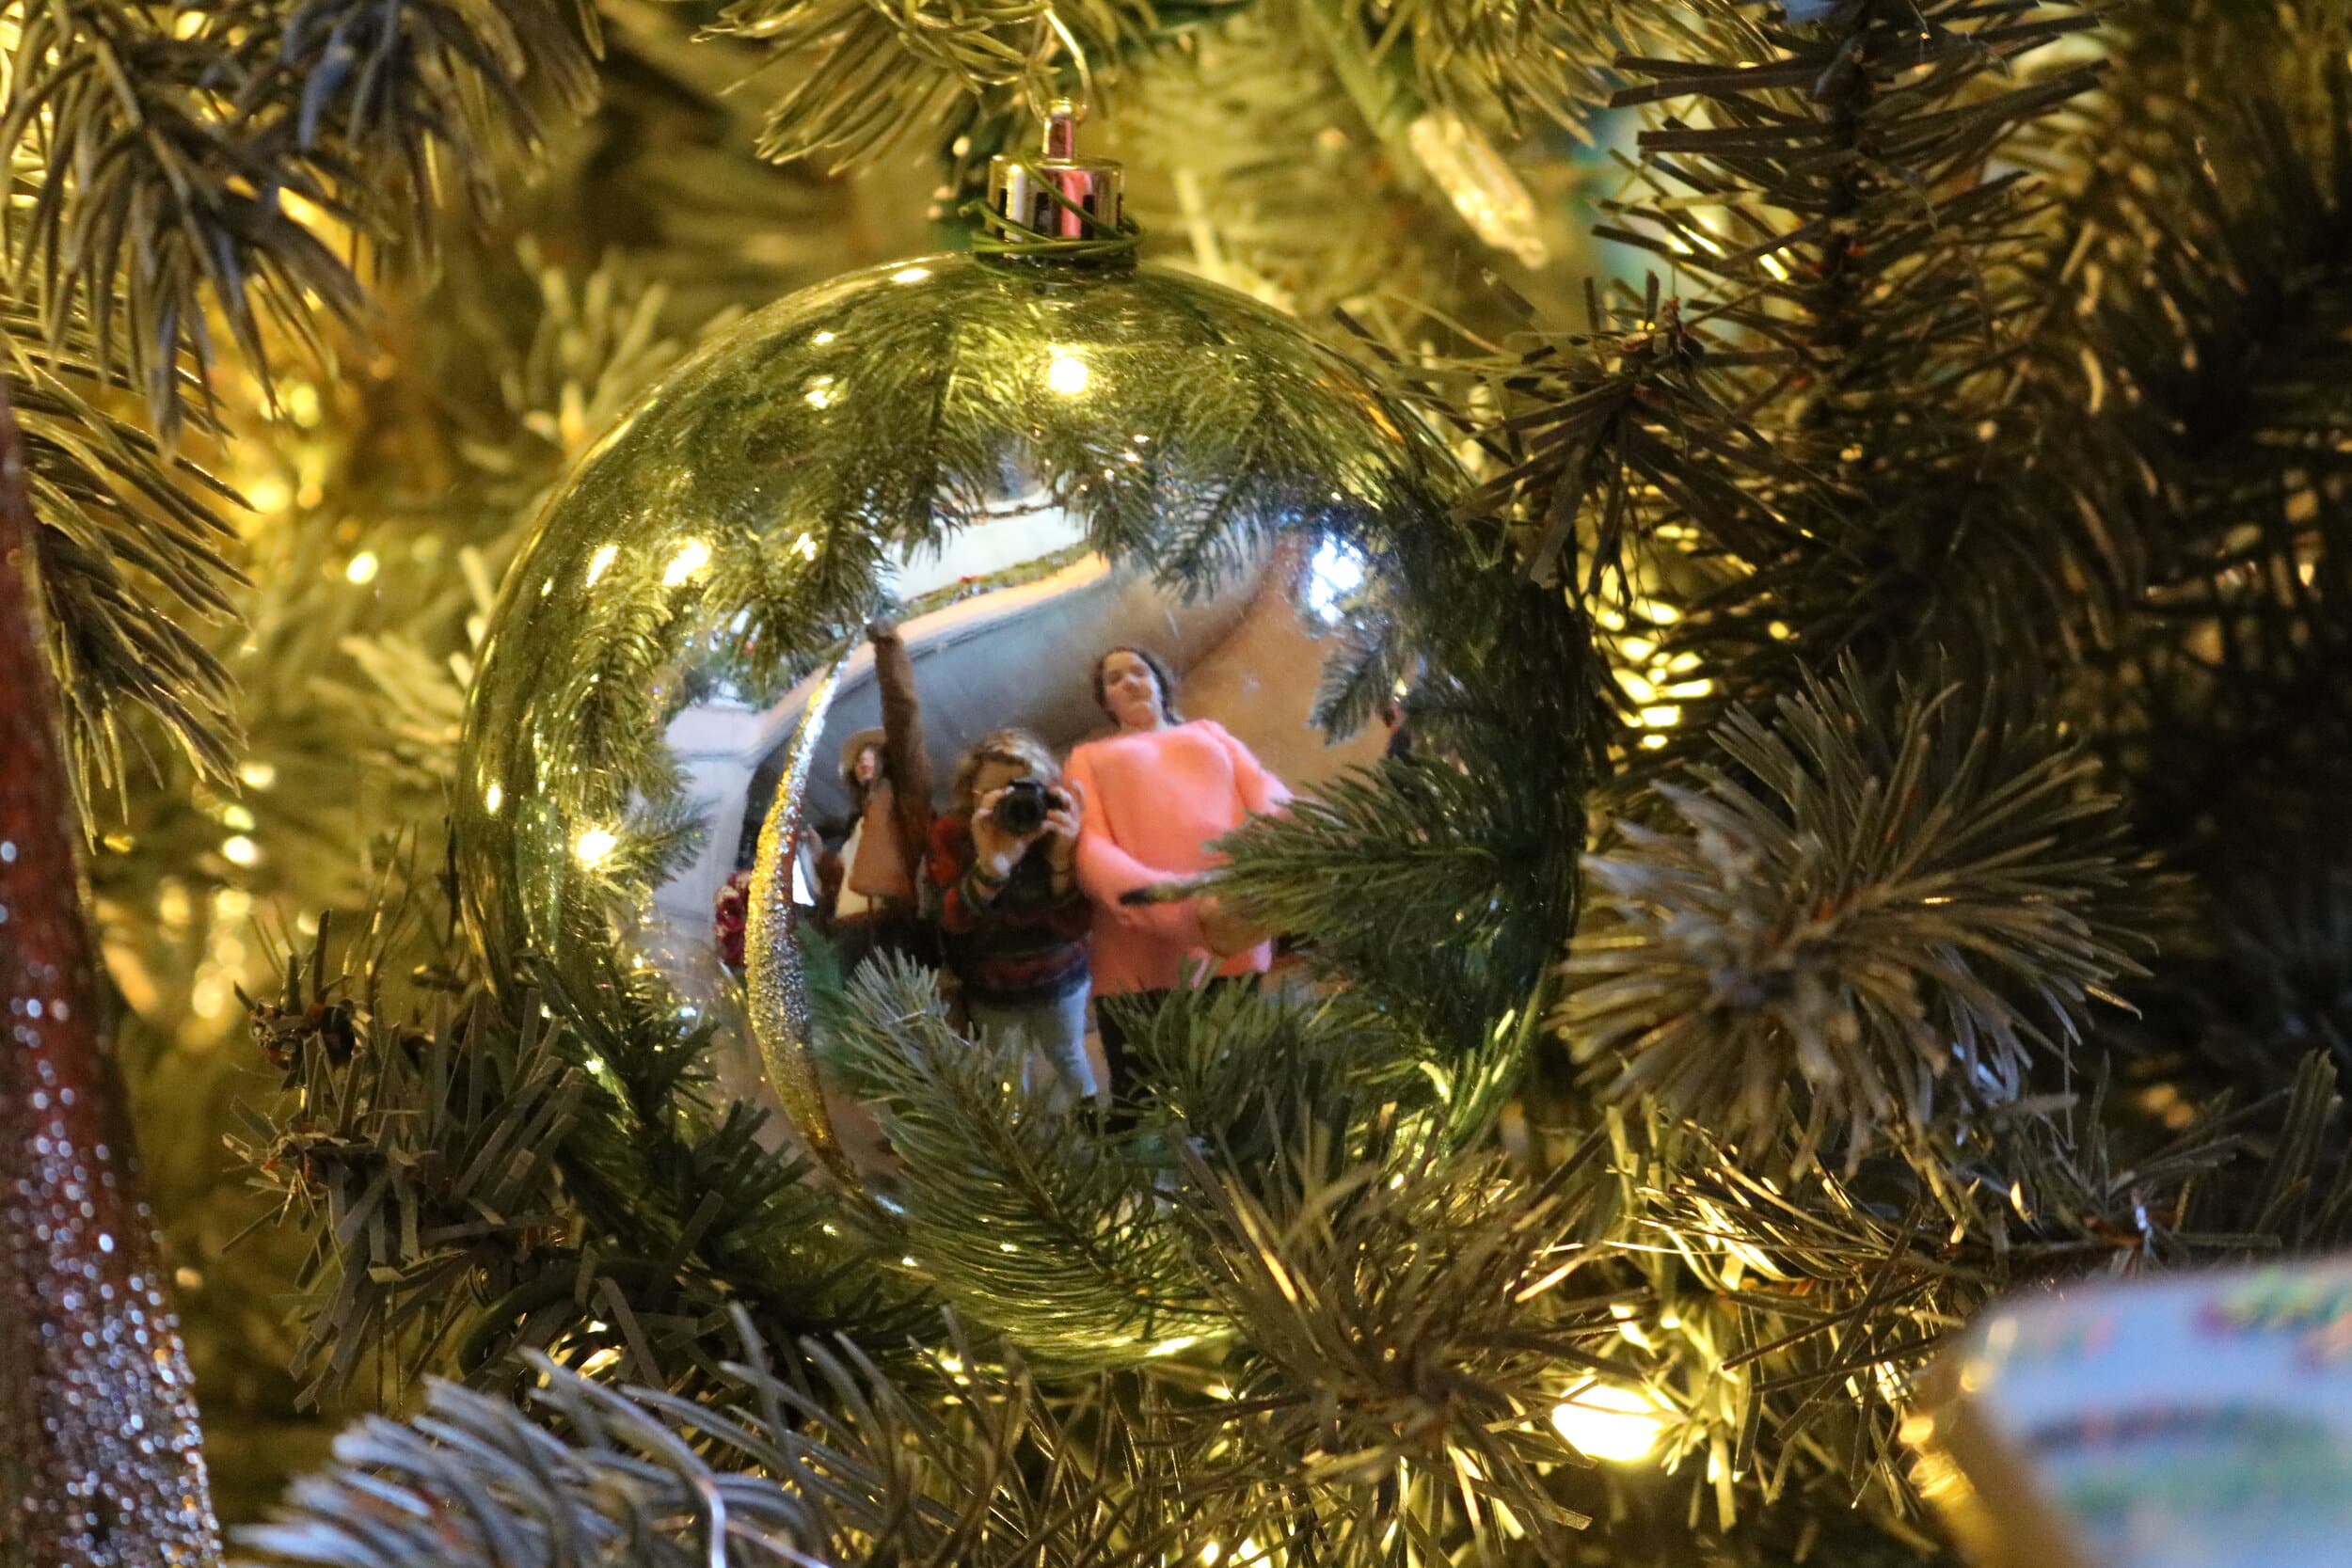 A picture of me and my friend, Beebe Griner, in a shiny ornament that was hung on the Christmas tree at the bottom of the main stair case.